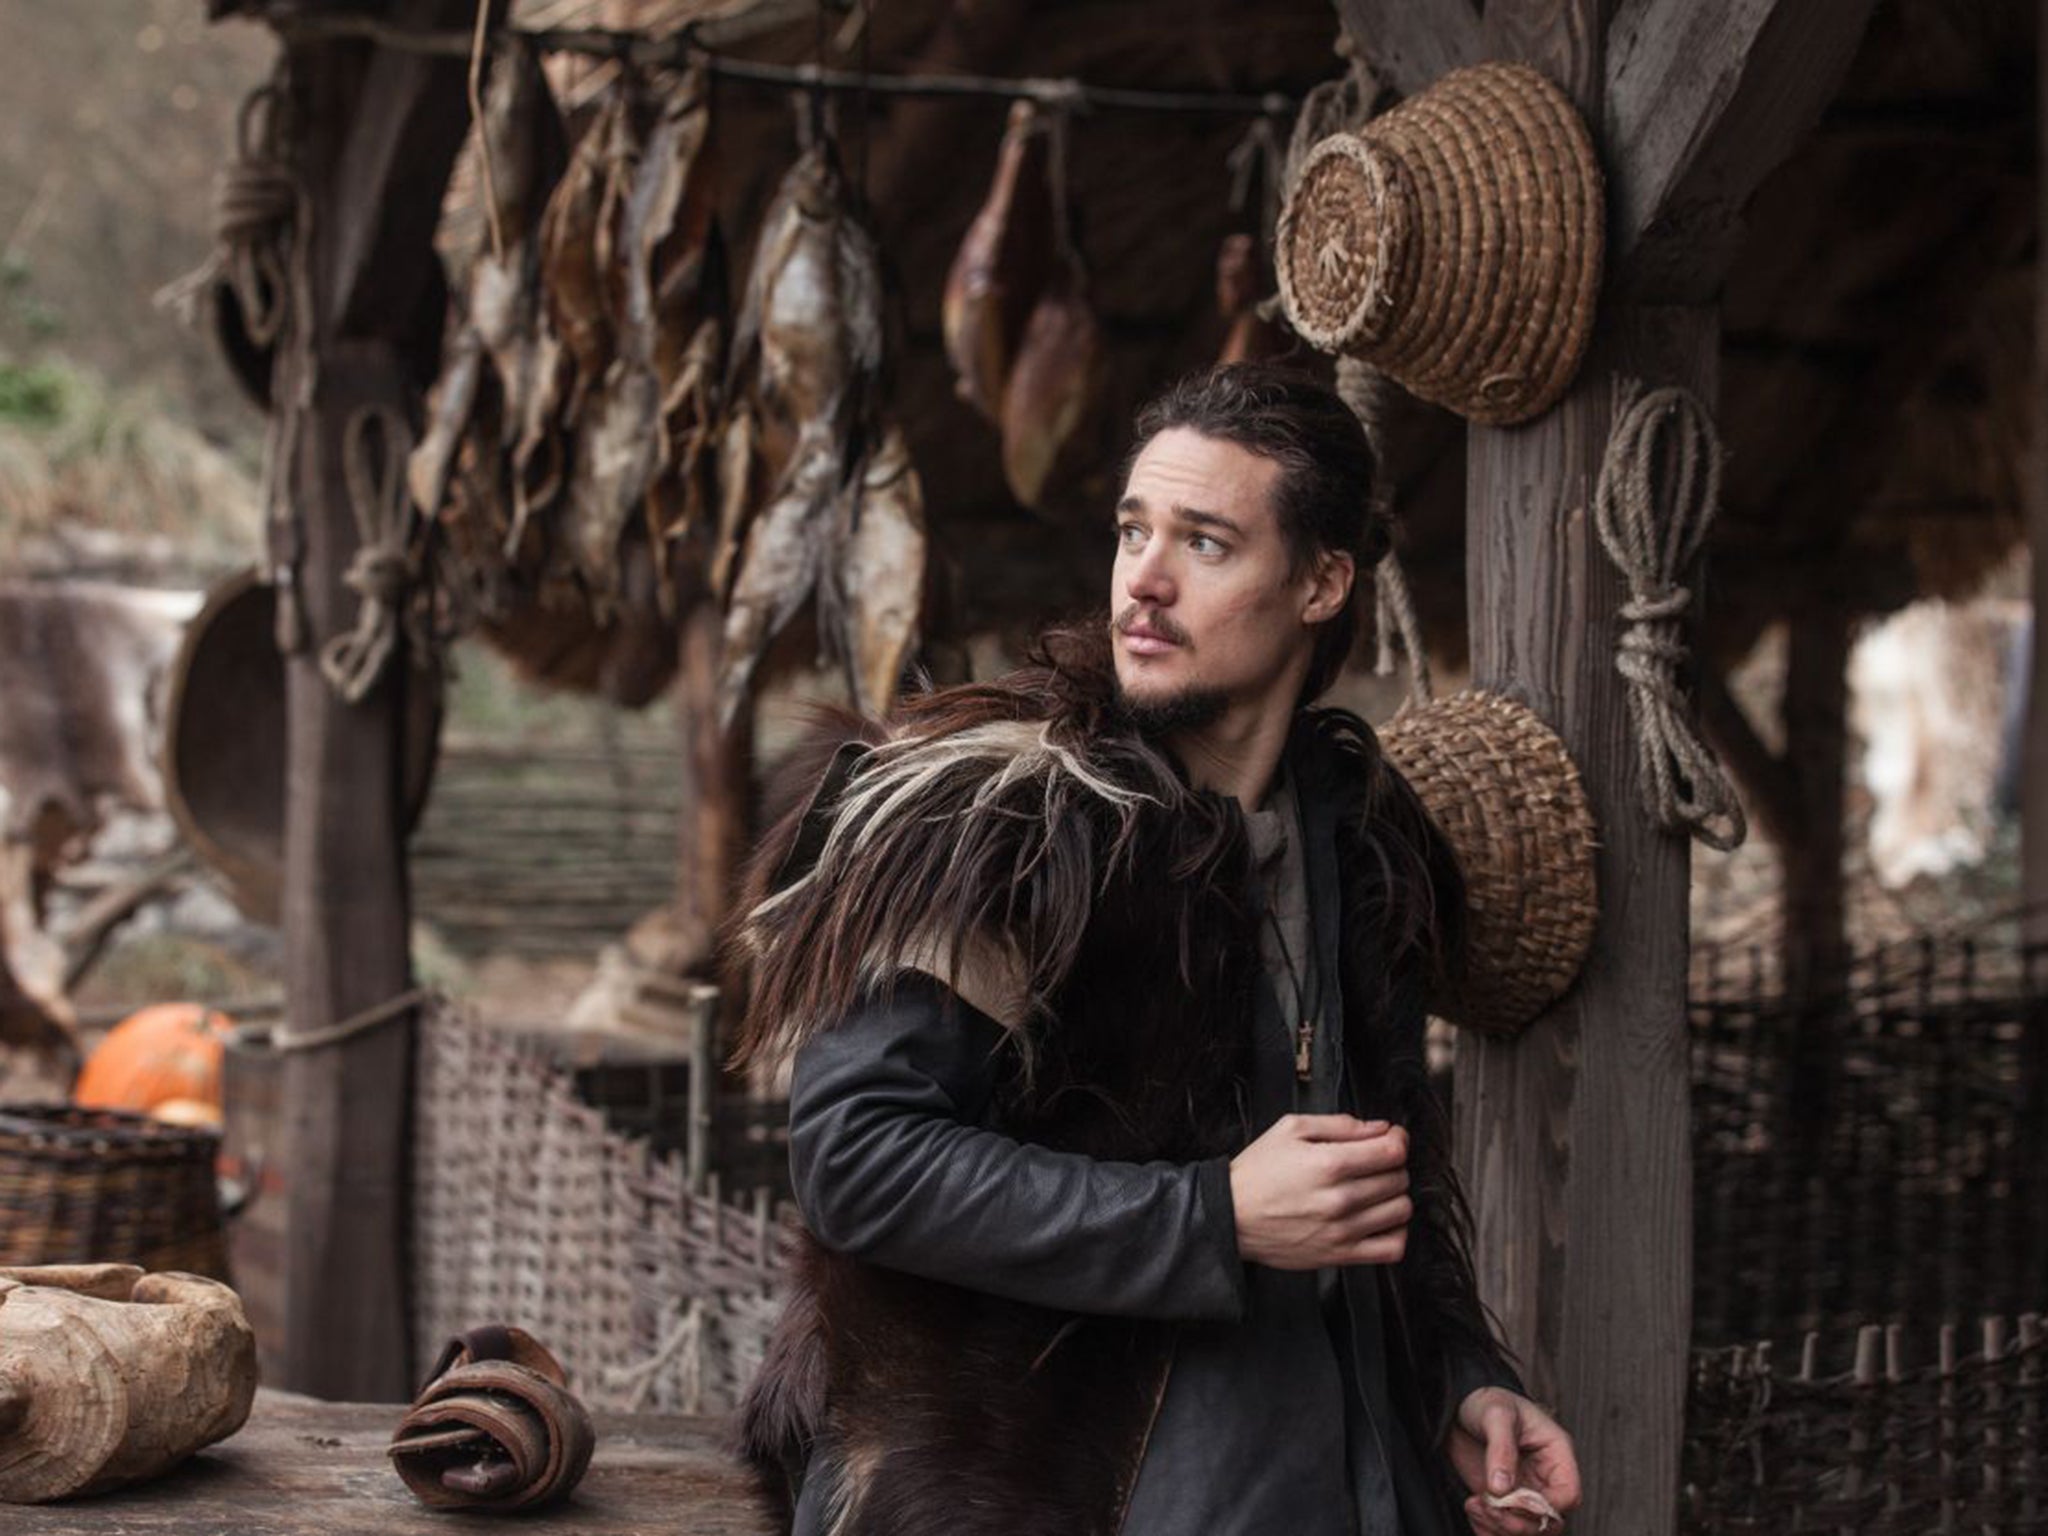 Mixed-up kid: Uhtred, played by Alexander Dreymon